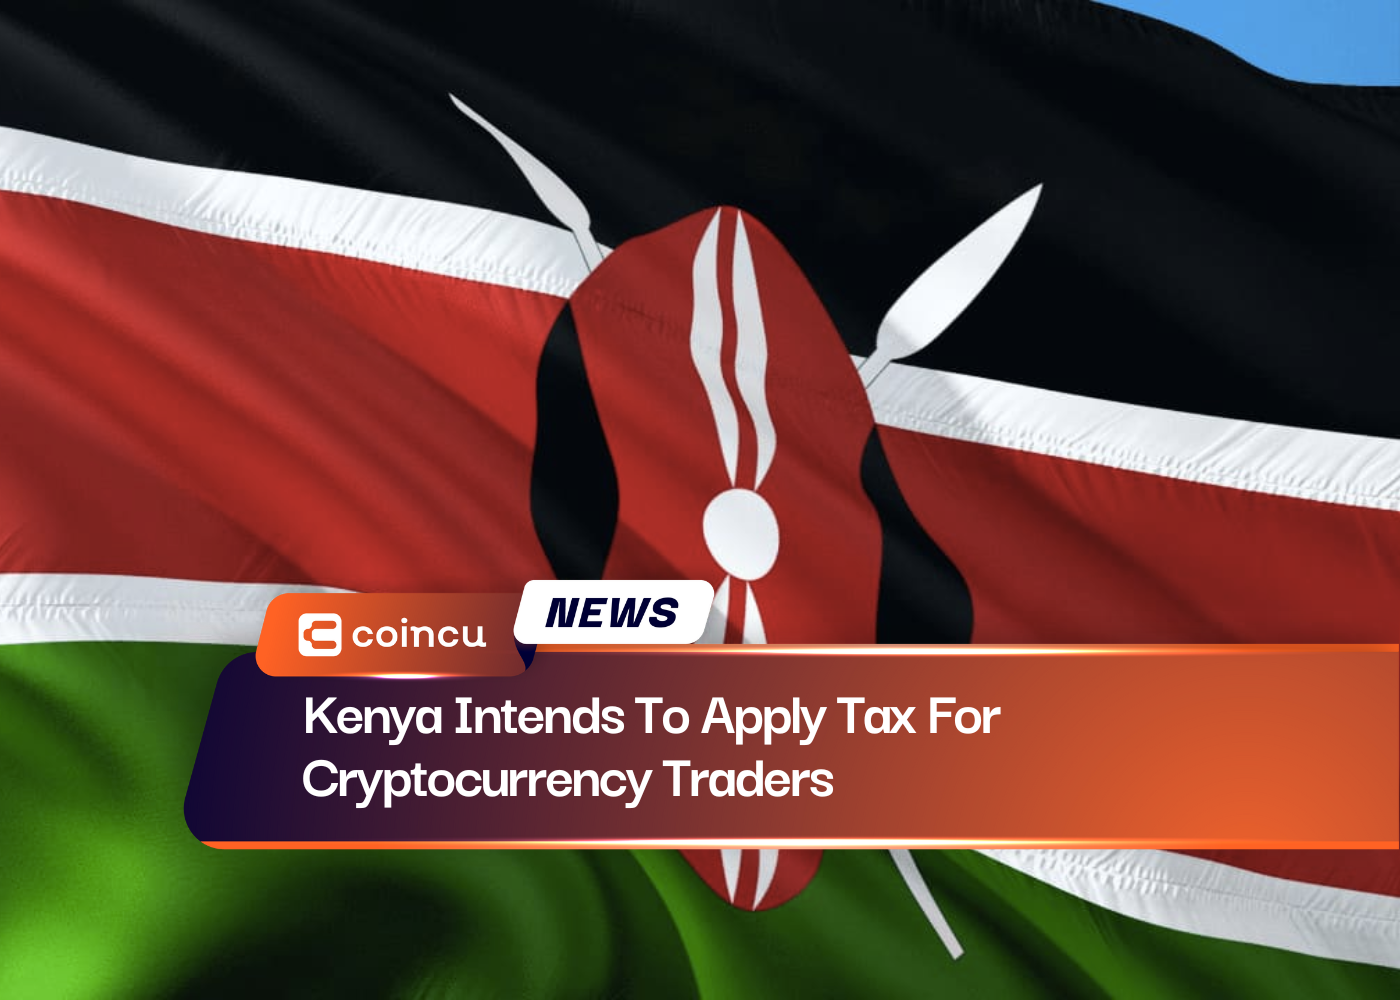 Kenya Intends To Apply Tax For Cryptocurrency Traders